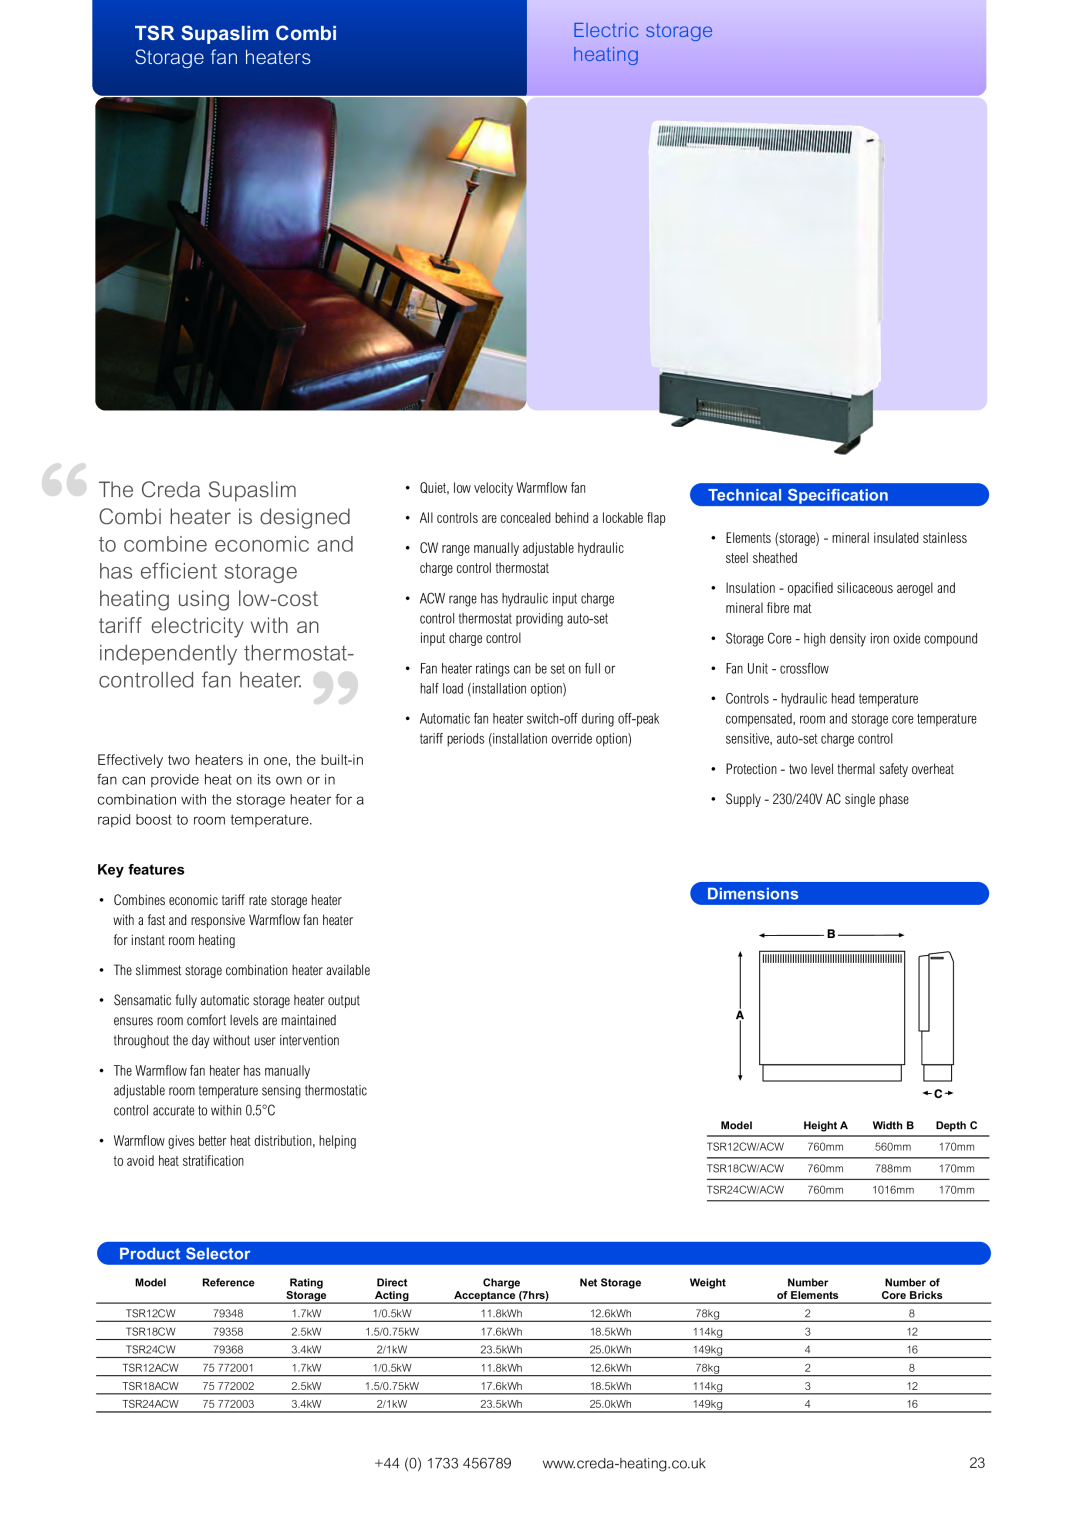 Creda Heating Solution manual TSR Supaslim Combi, Storage fan heaters, Electric storage heating, Technical Specification 